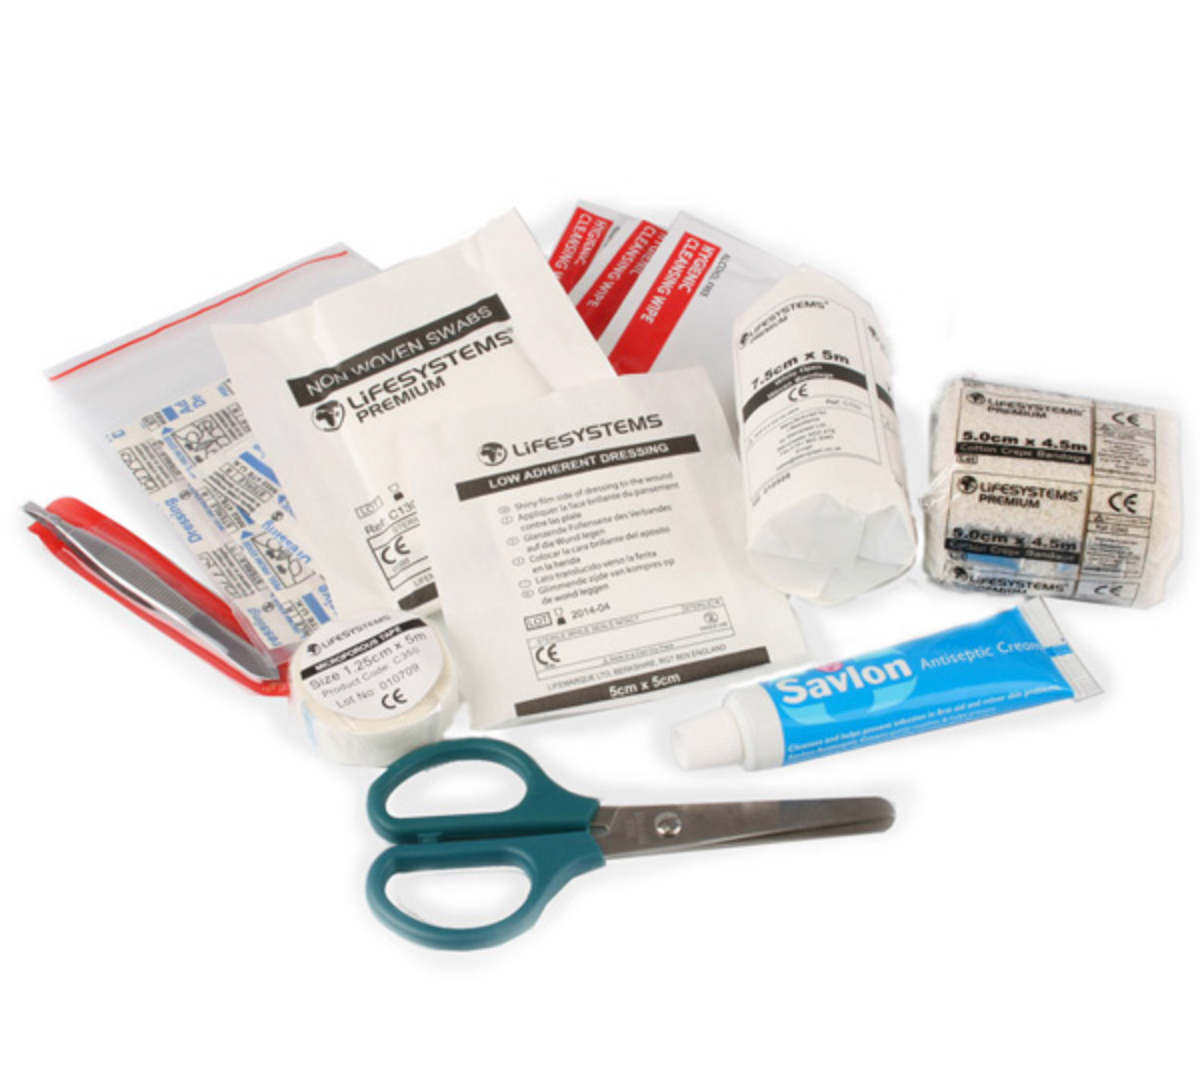 Life Systems Pocket First Aid Kit - HIRE